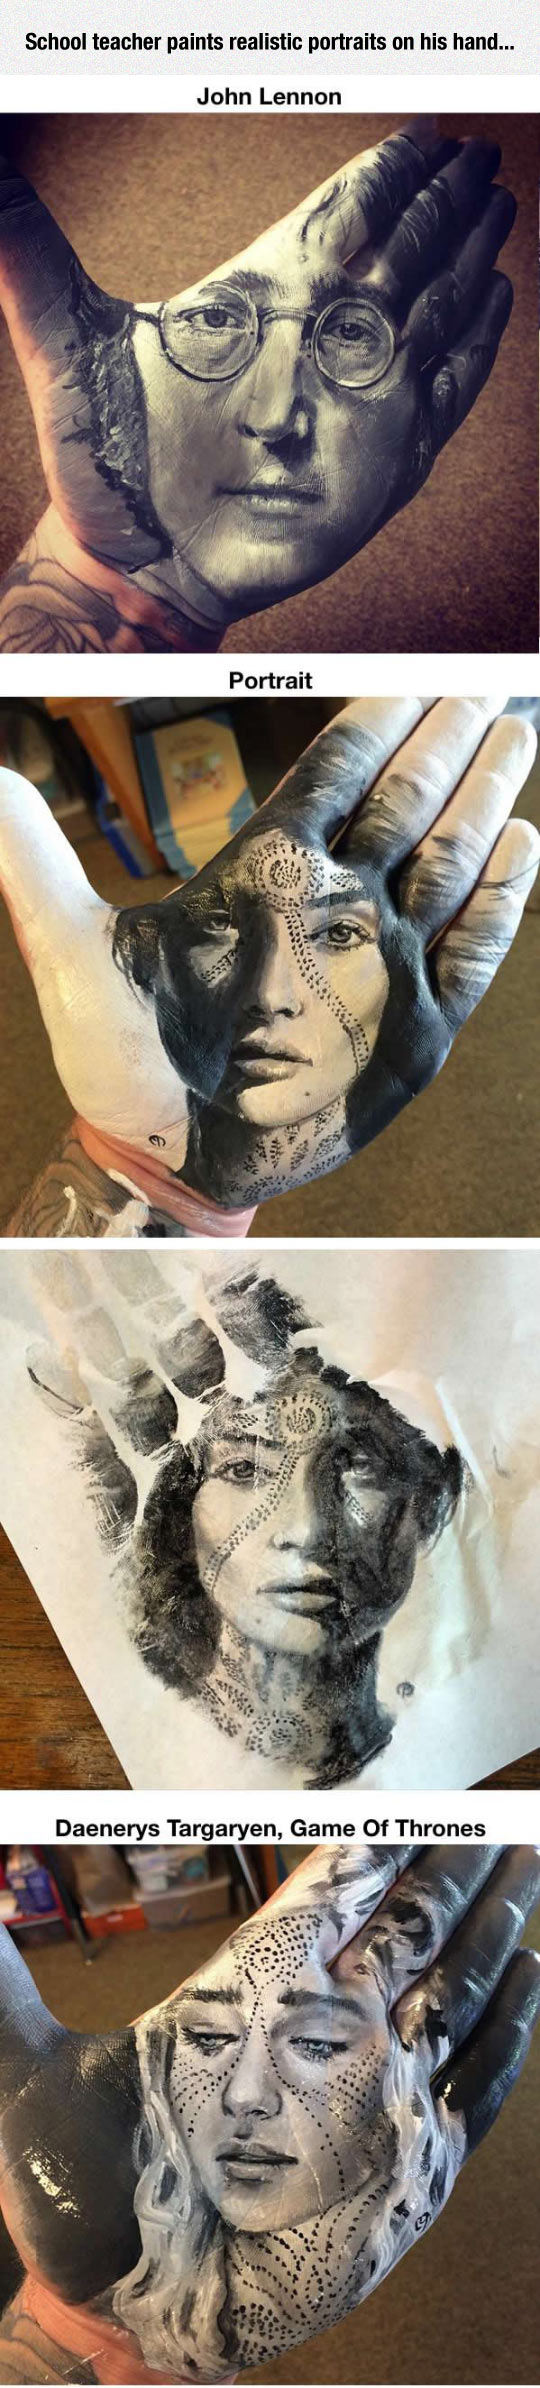 Realistic Portraits Painted On Hands